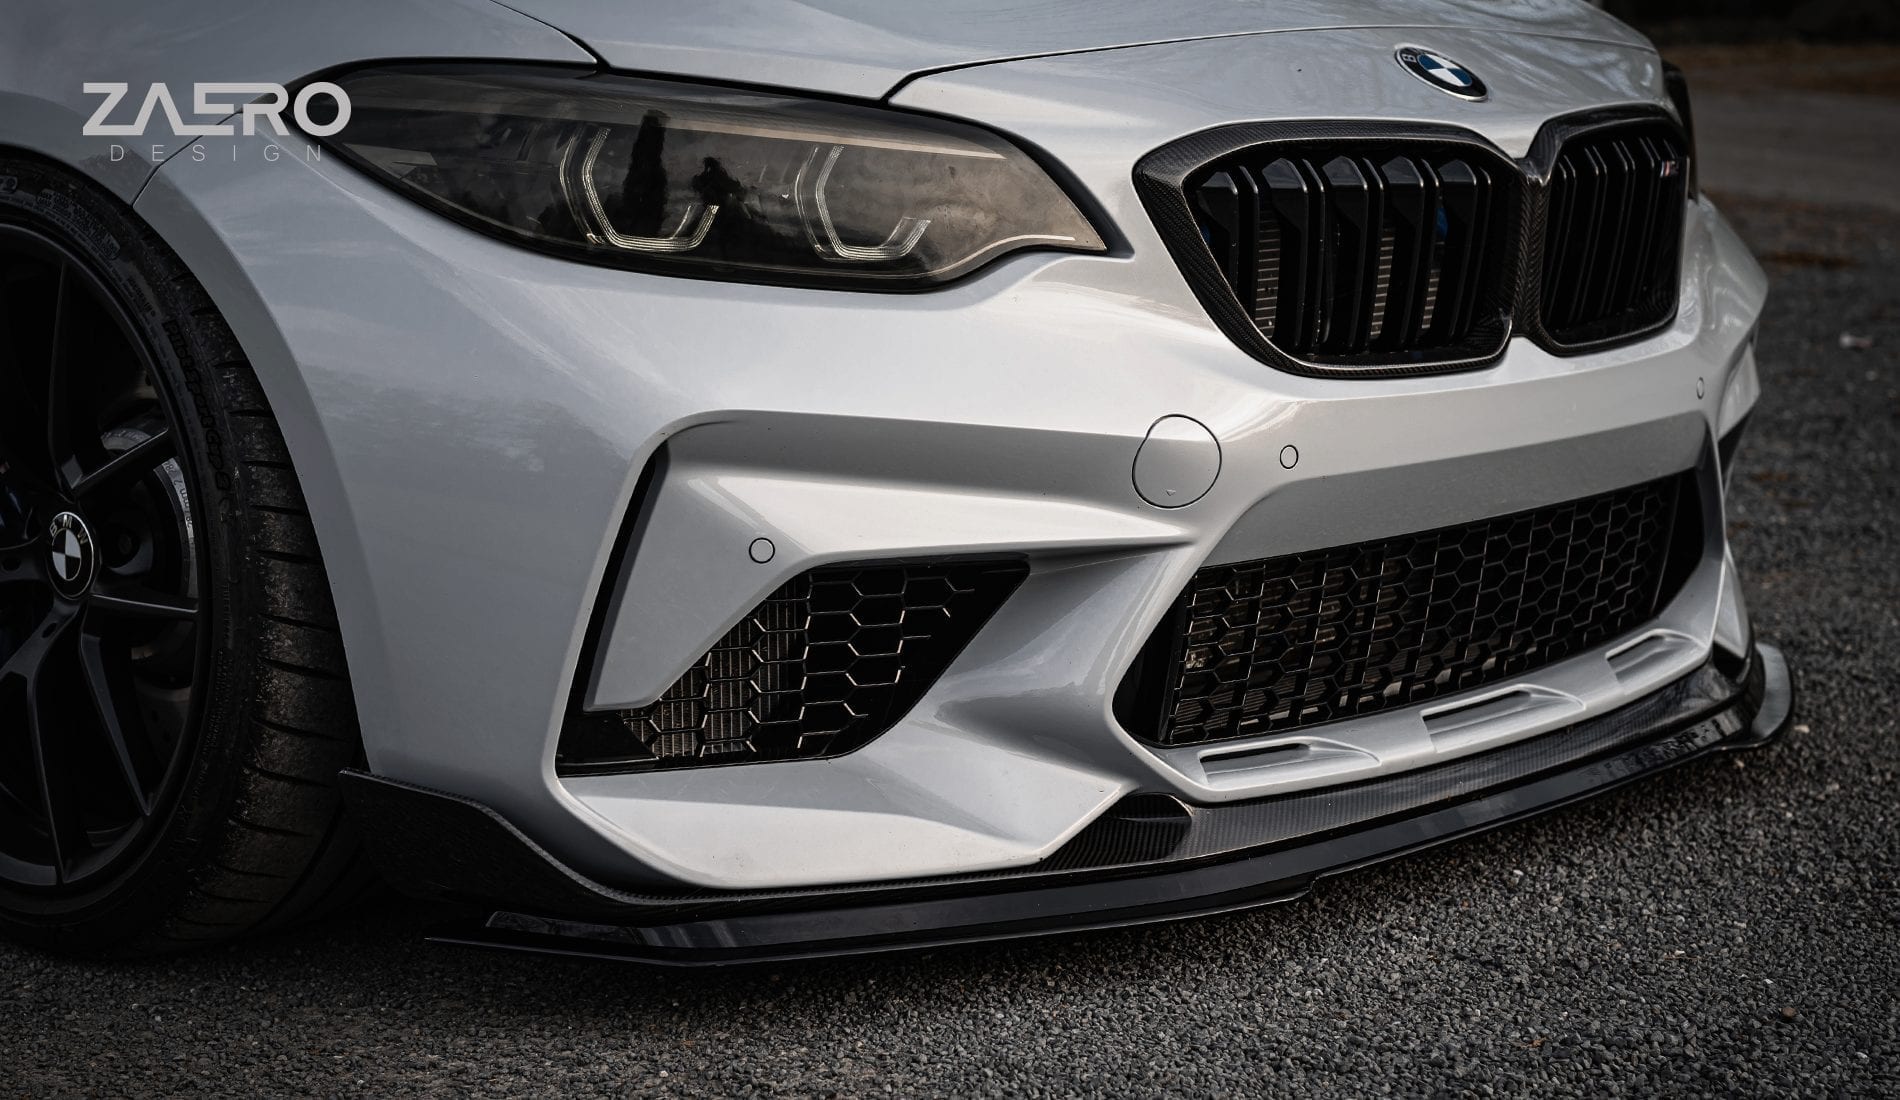 EVO-R FRONT SPOILER ADD-ON FOR BMW M2 F87 COMPETITION